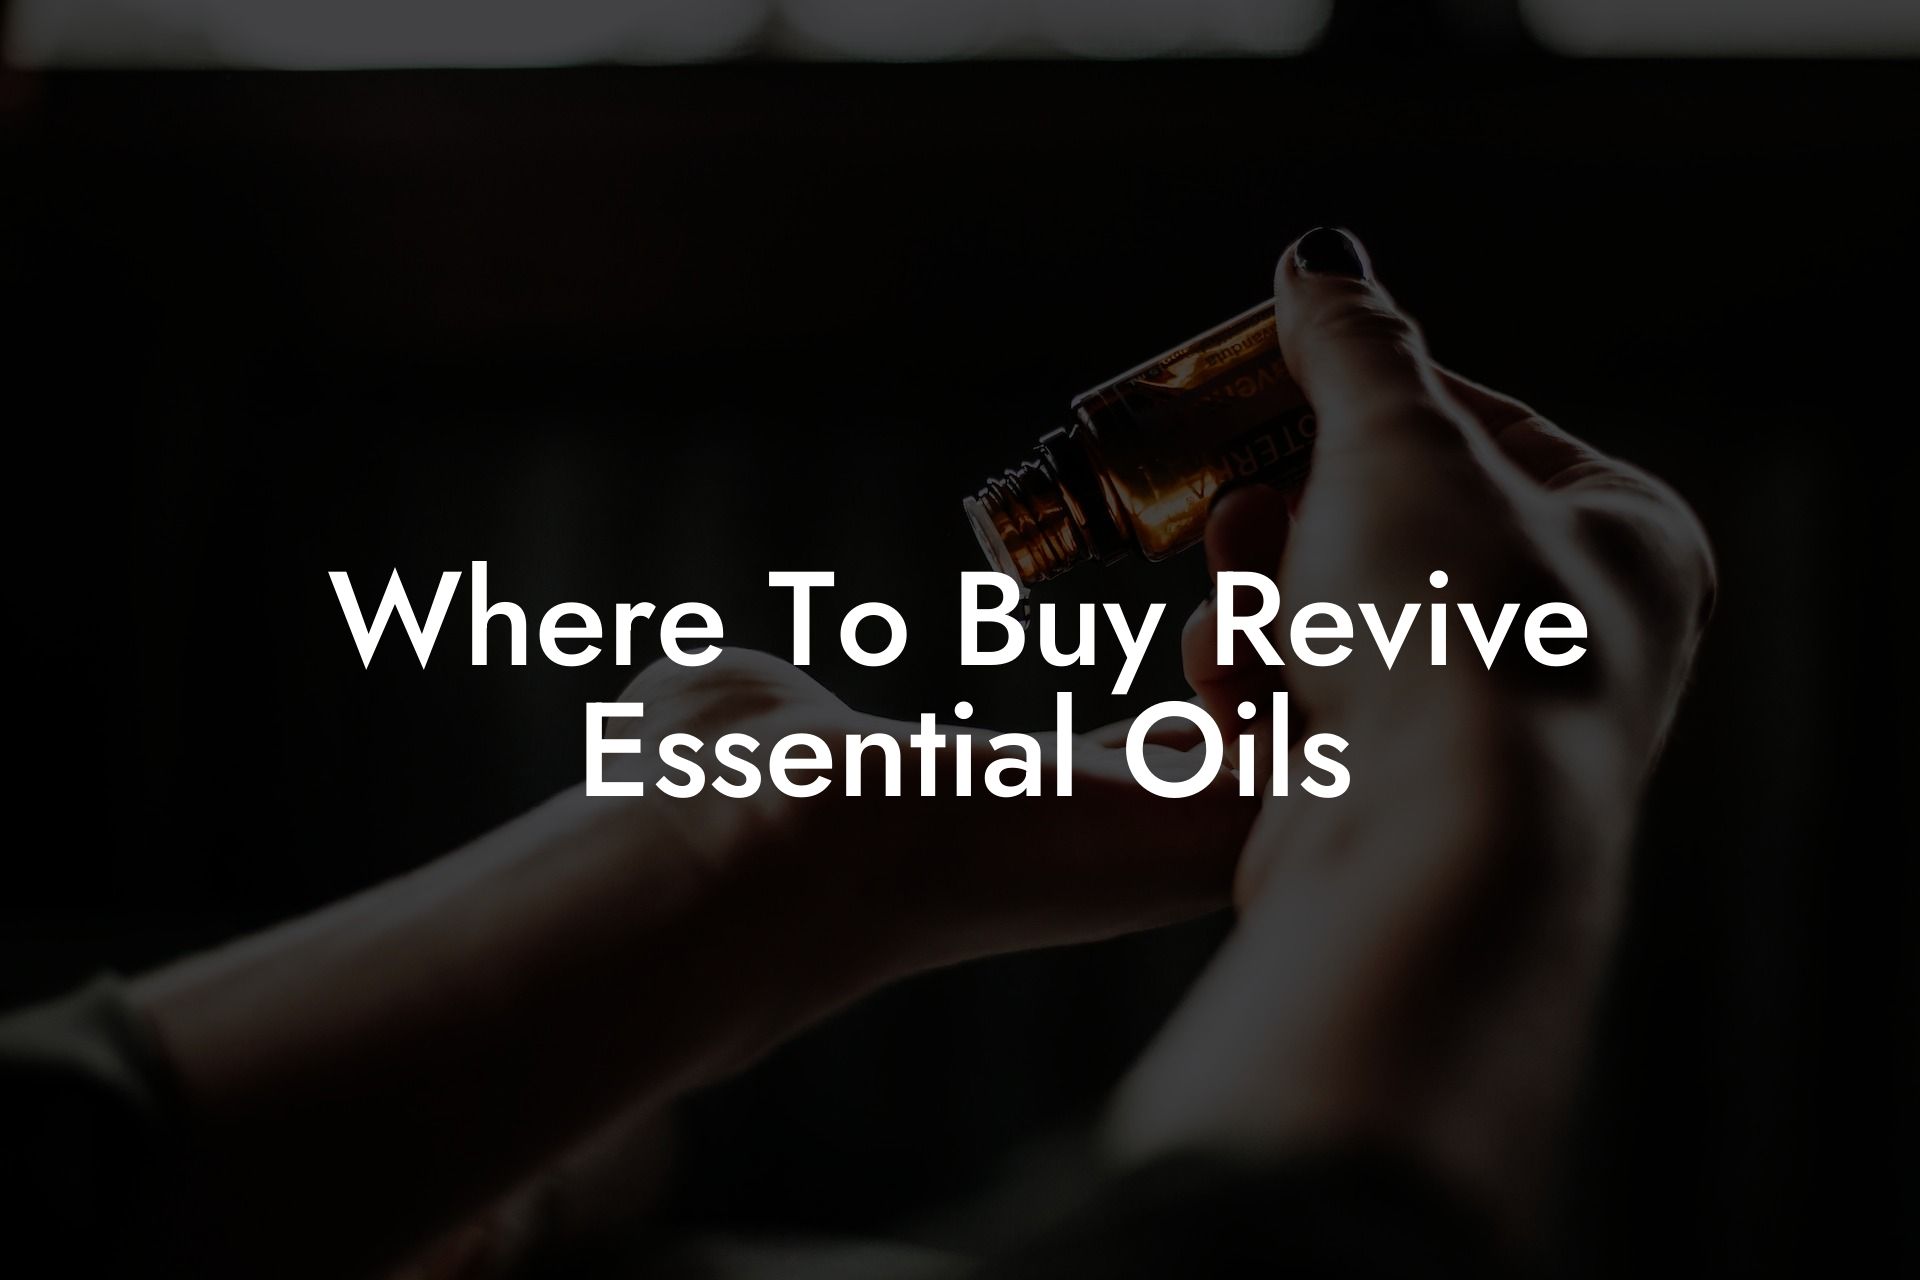 Where To Buy Revive Essential Oils